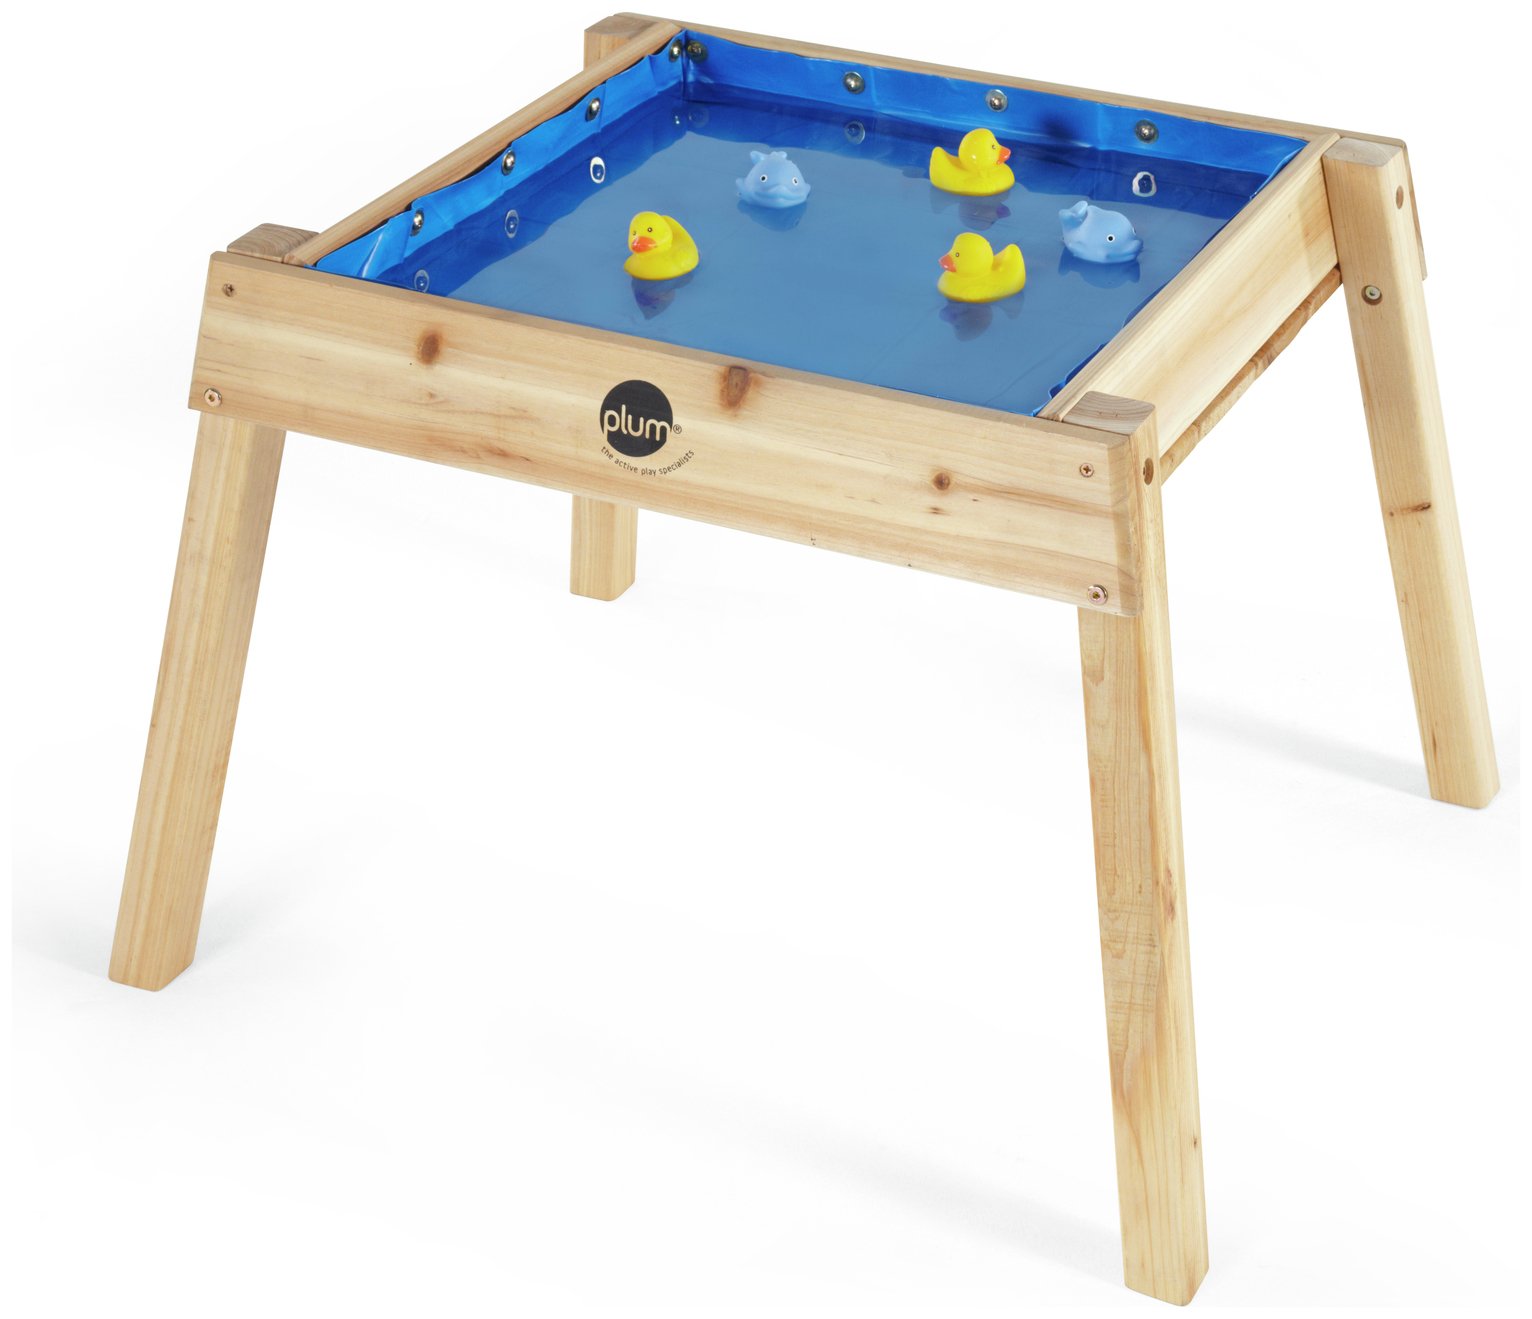 Plum Build and Splash Wooden Sand and Water Table. Review